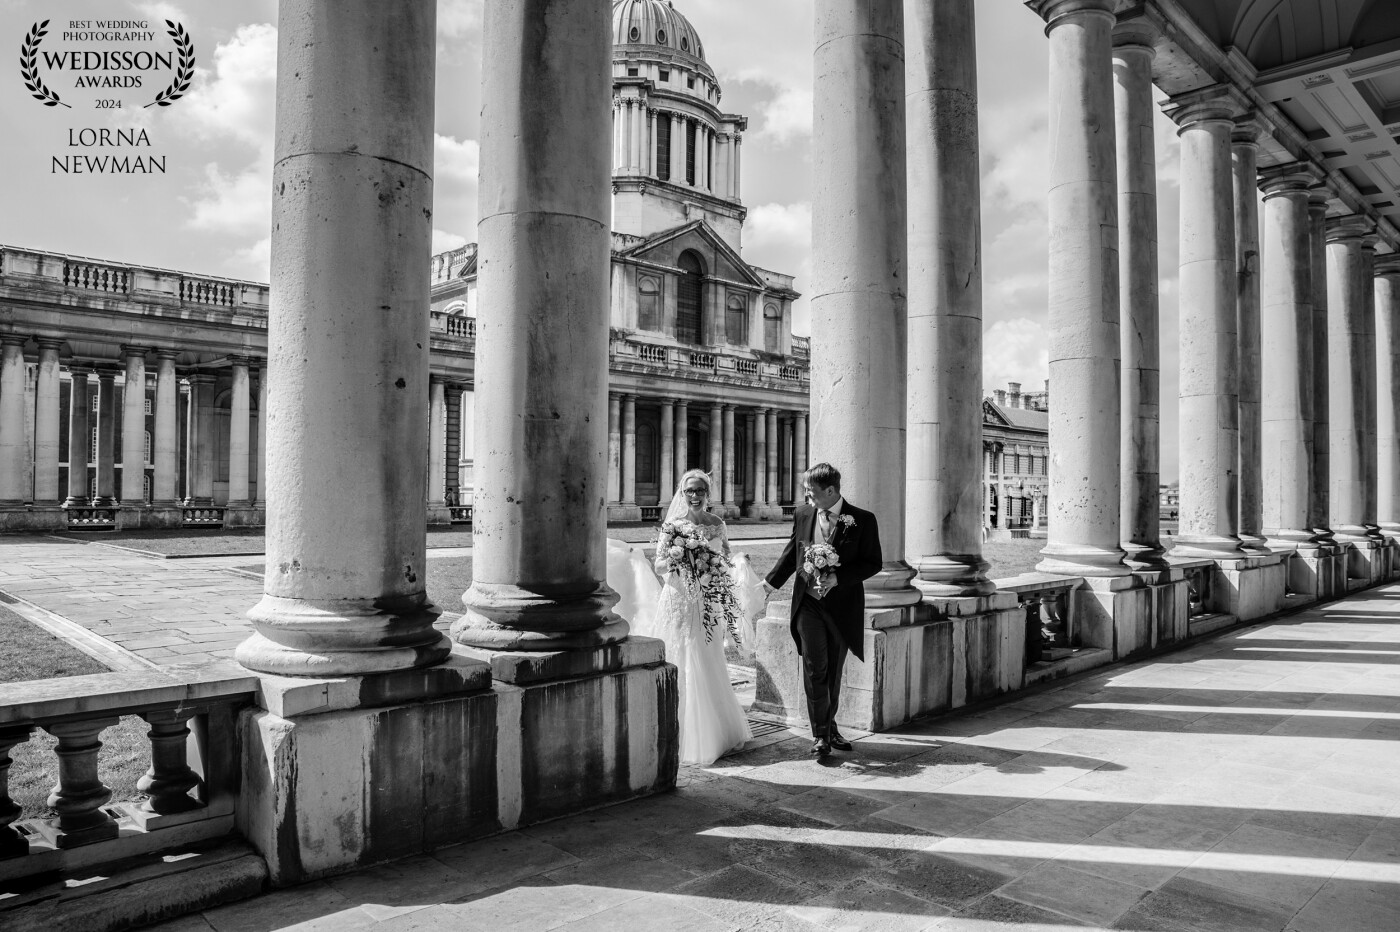 Annie and Jeoff taking a moment just after they got married at the beautiful Old Royal Naval College, in Greenwich London. <br />
<br />
You couldn't get a more romantic setting, it's just stunning! Congratulations to you both.